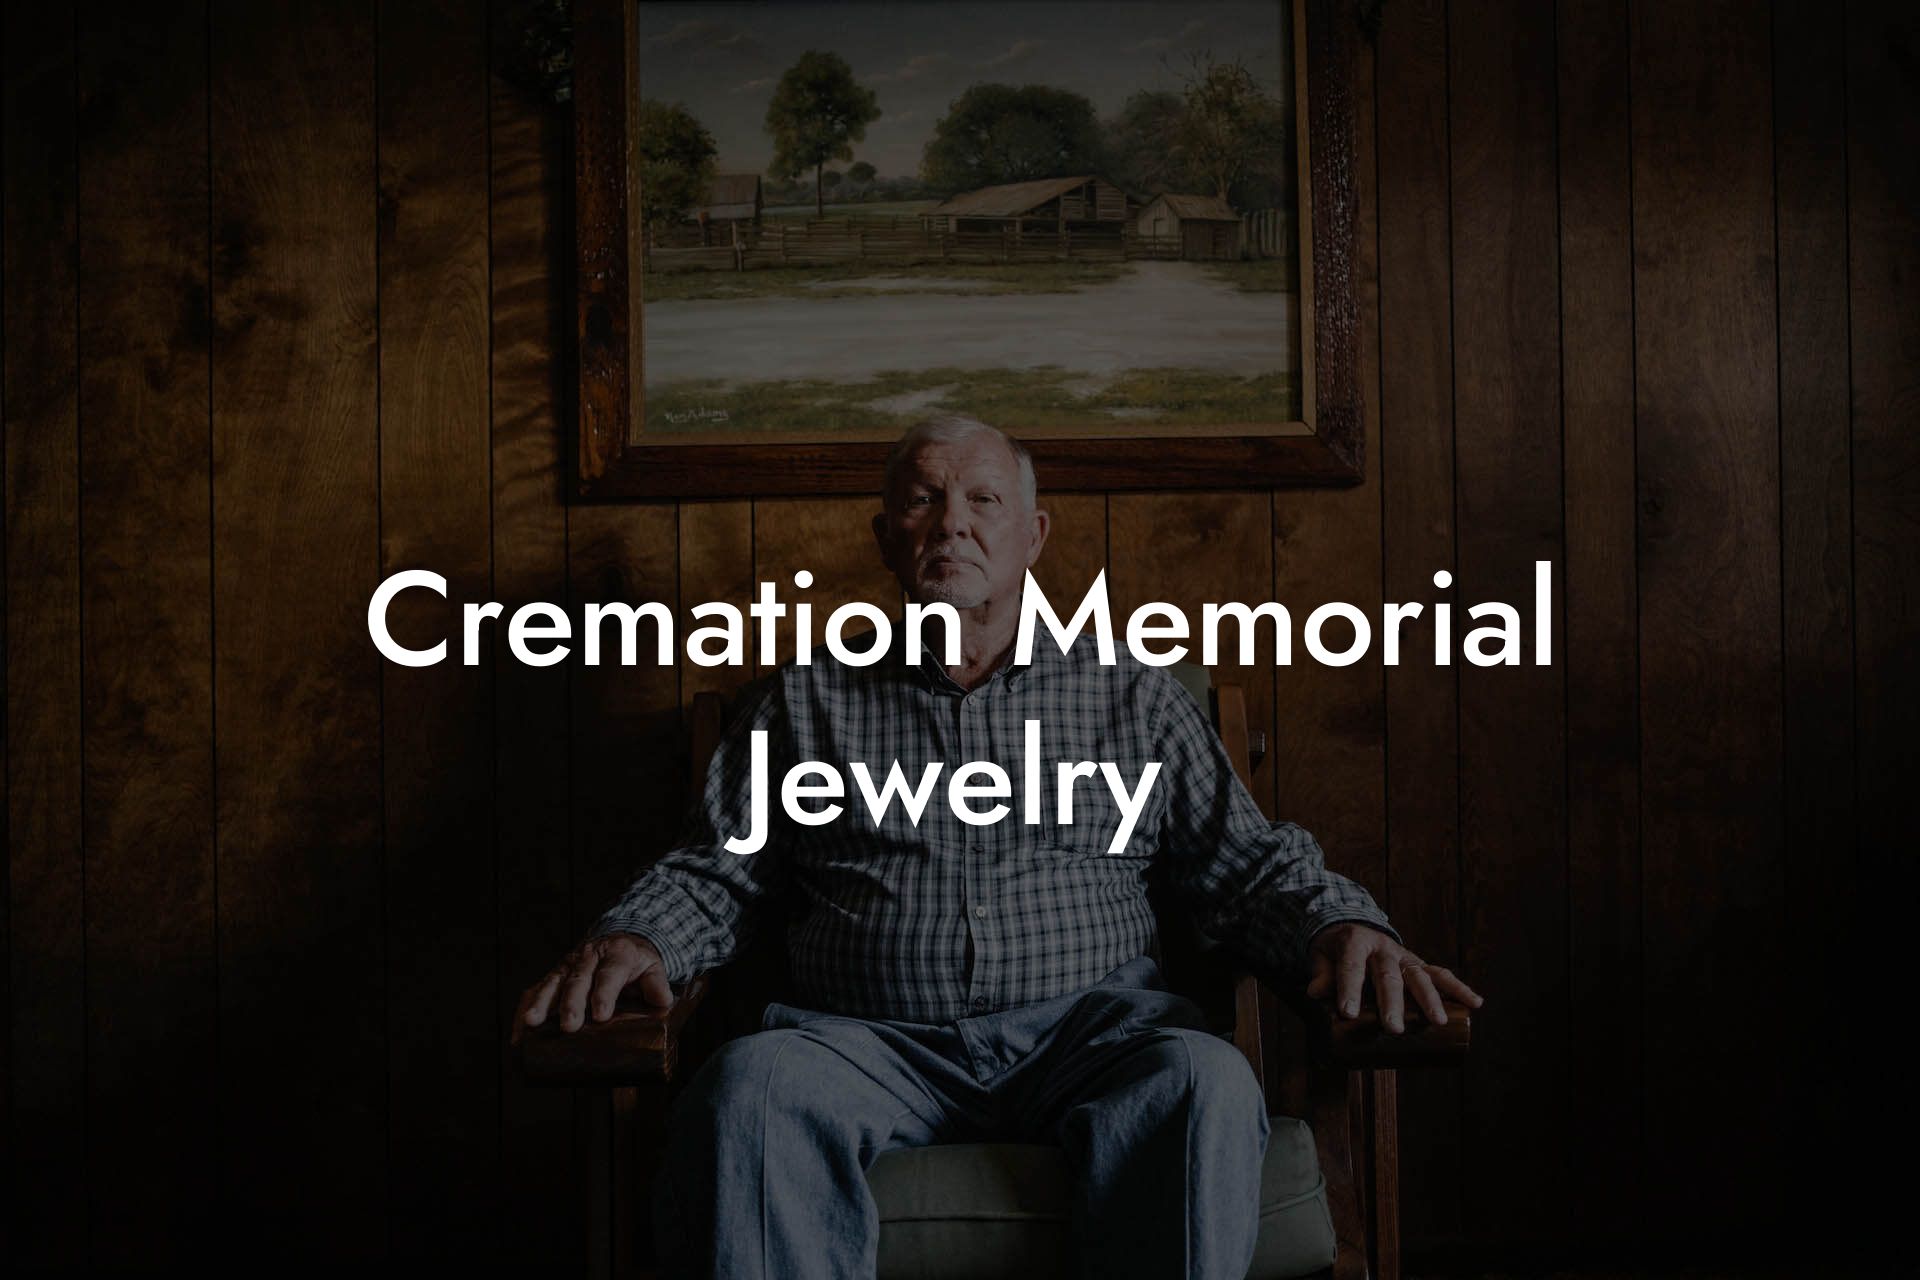 Cremation Memorial Jewelry